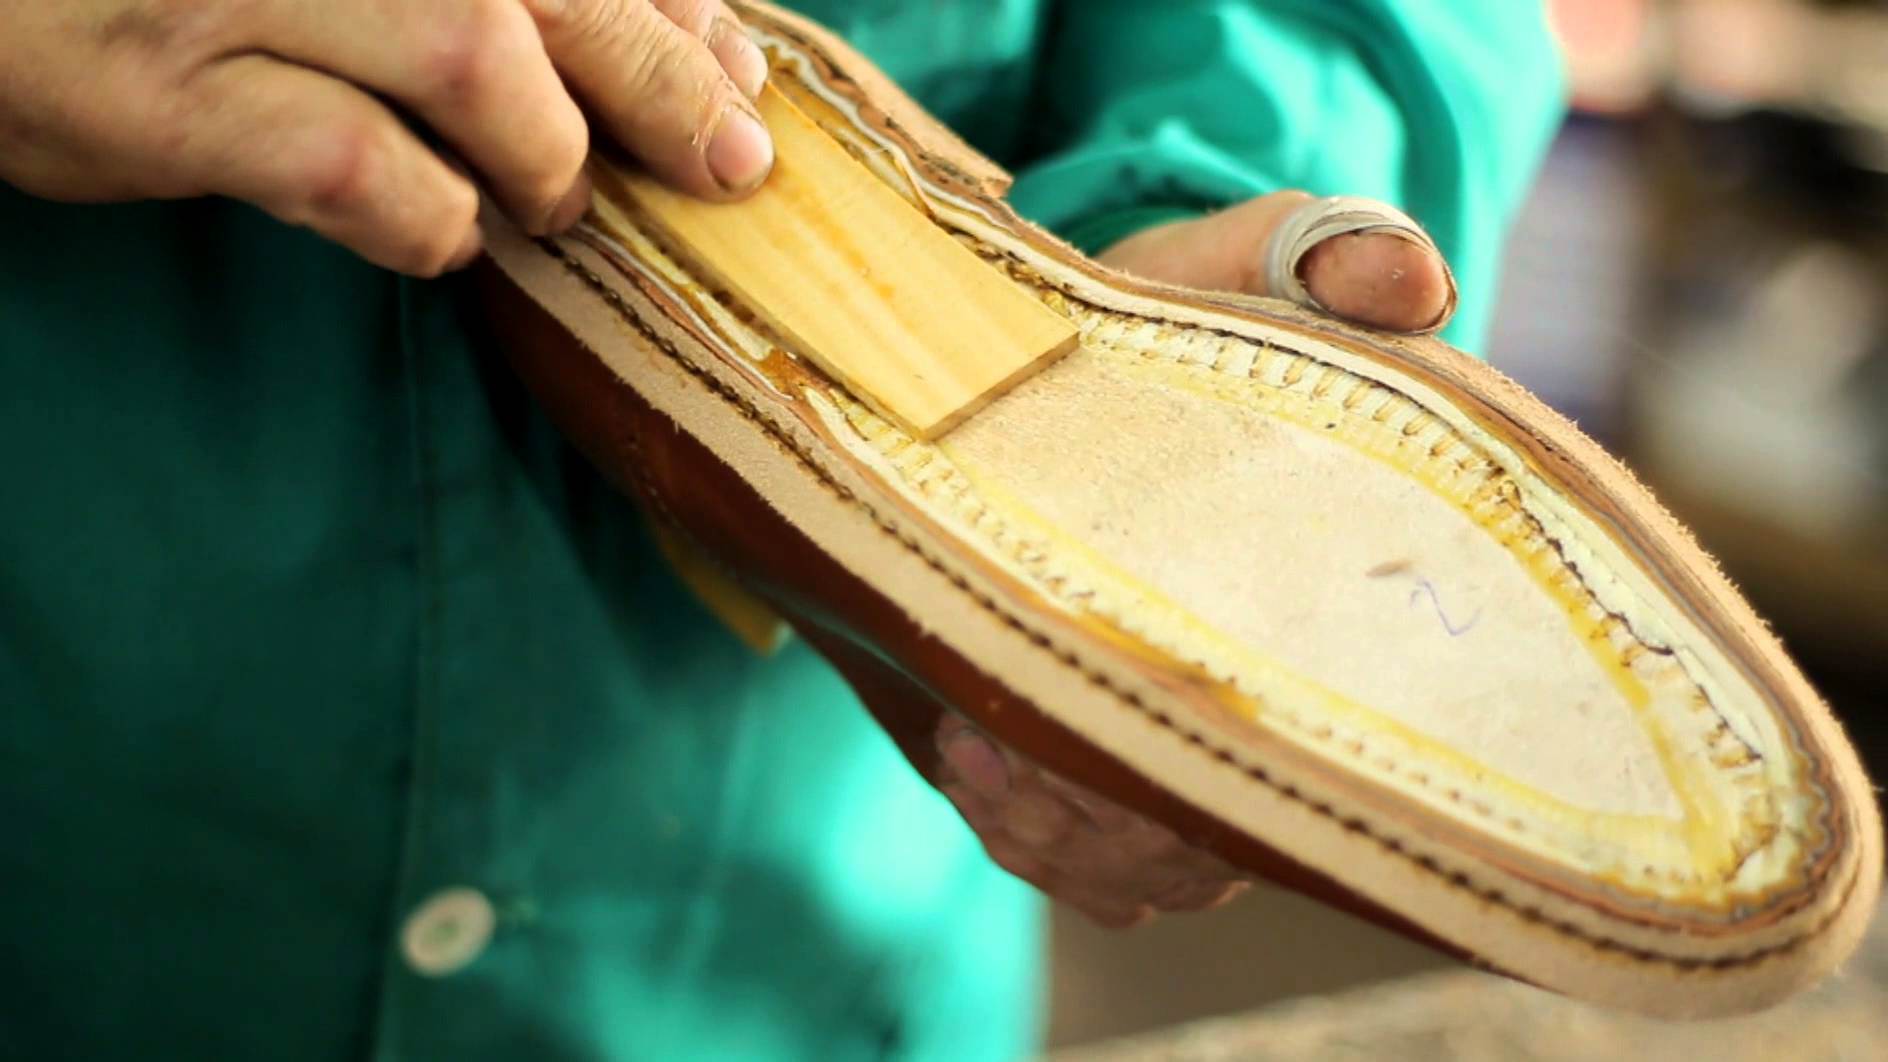 SHOES CONSTRUCTION: GOODYEAR WELT